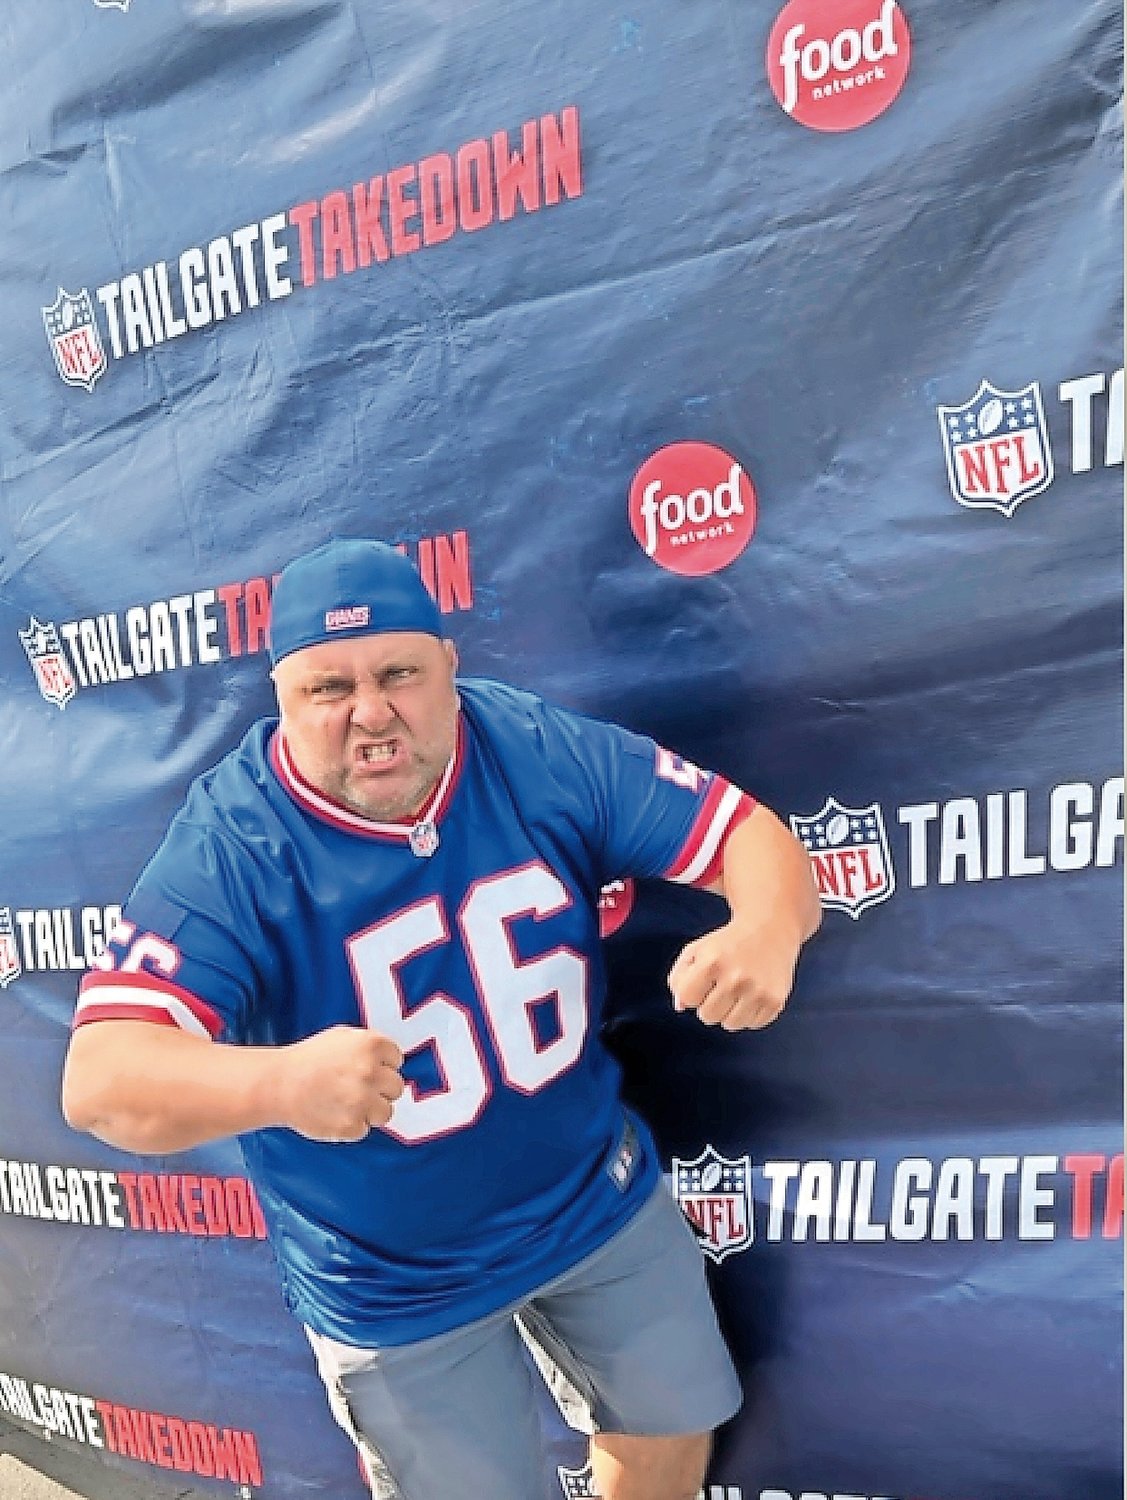 John Zozzaro was excited to be on the set of Food Network’s ‘Tailgate Takedown.’ The avid football enthusiast and business owner said he had a lot of fun competing and being in the nationwide spotlight.